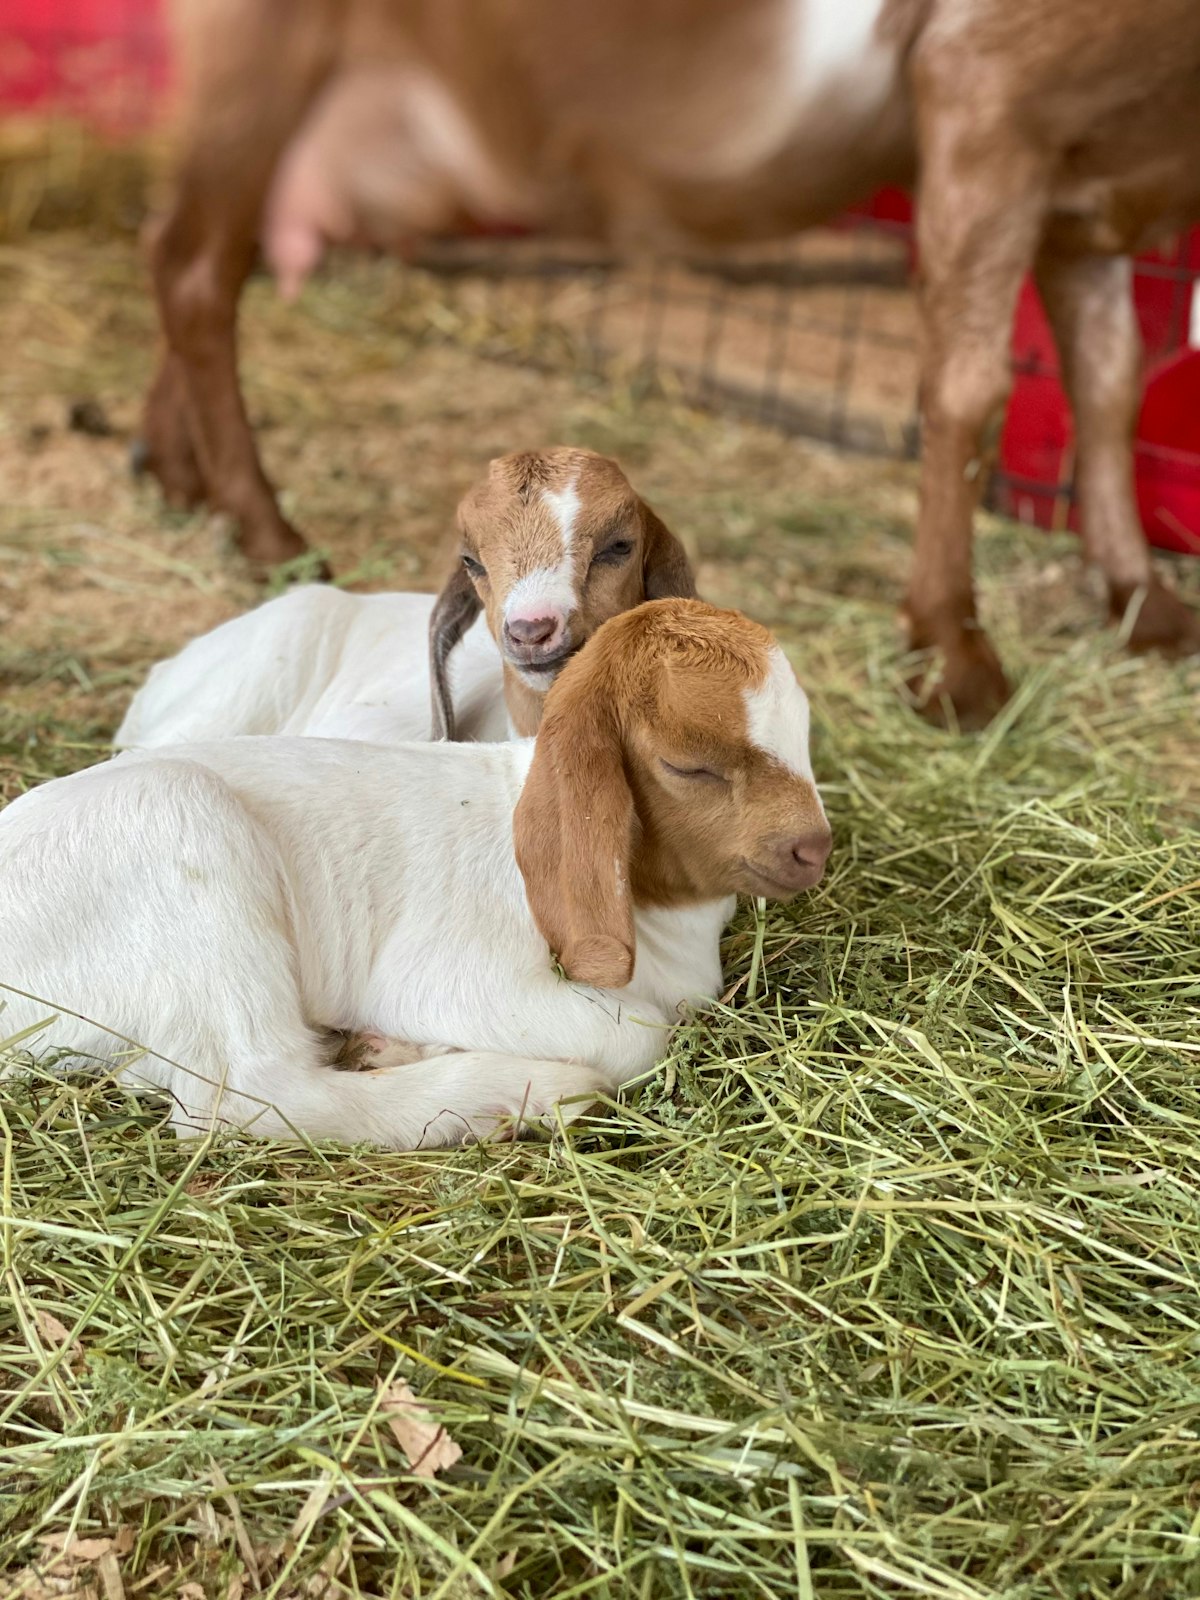 Baby goat at Young’s Jersey Dairy.